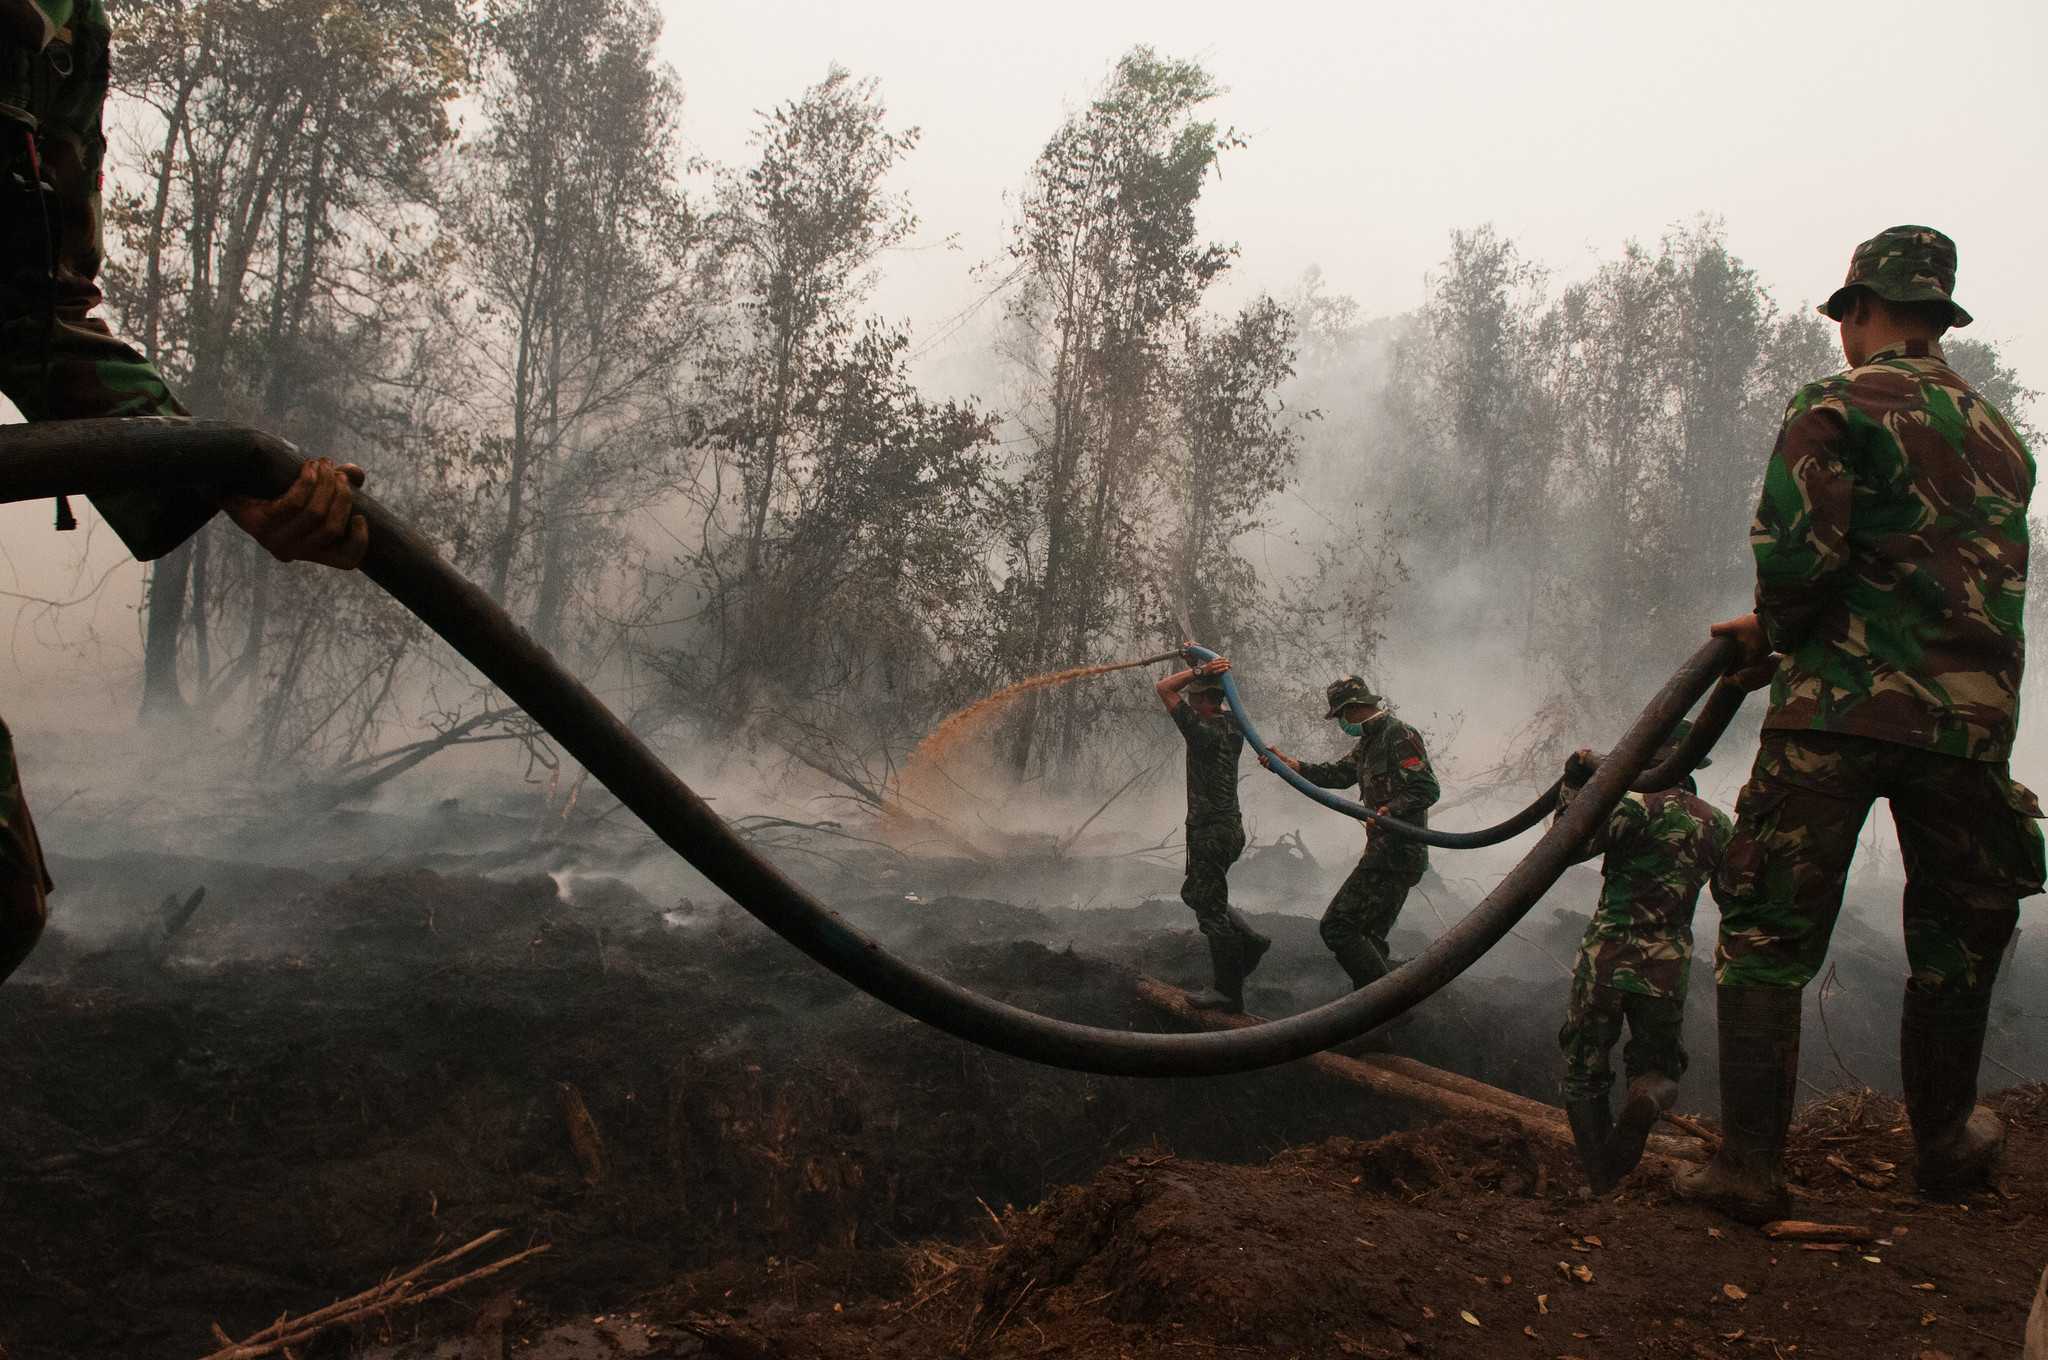 Army officers try to extinguish fires in peatland areas outside the city of Palangka Raya in Central Kalimantan province.